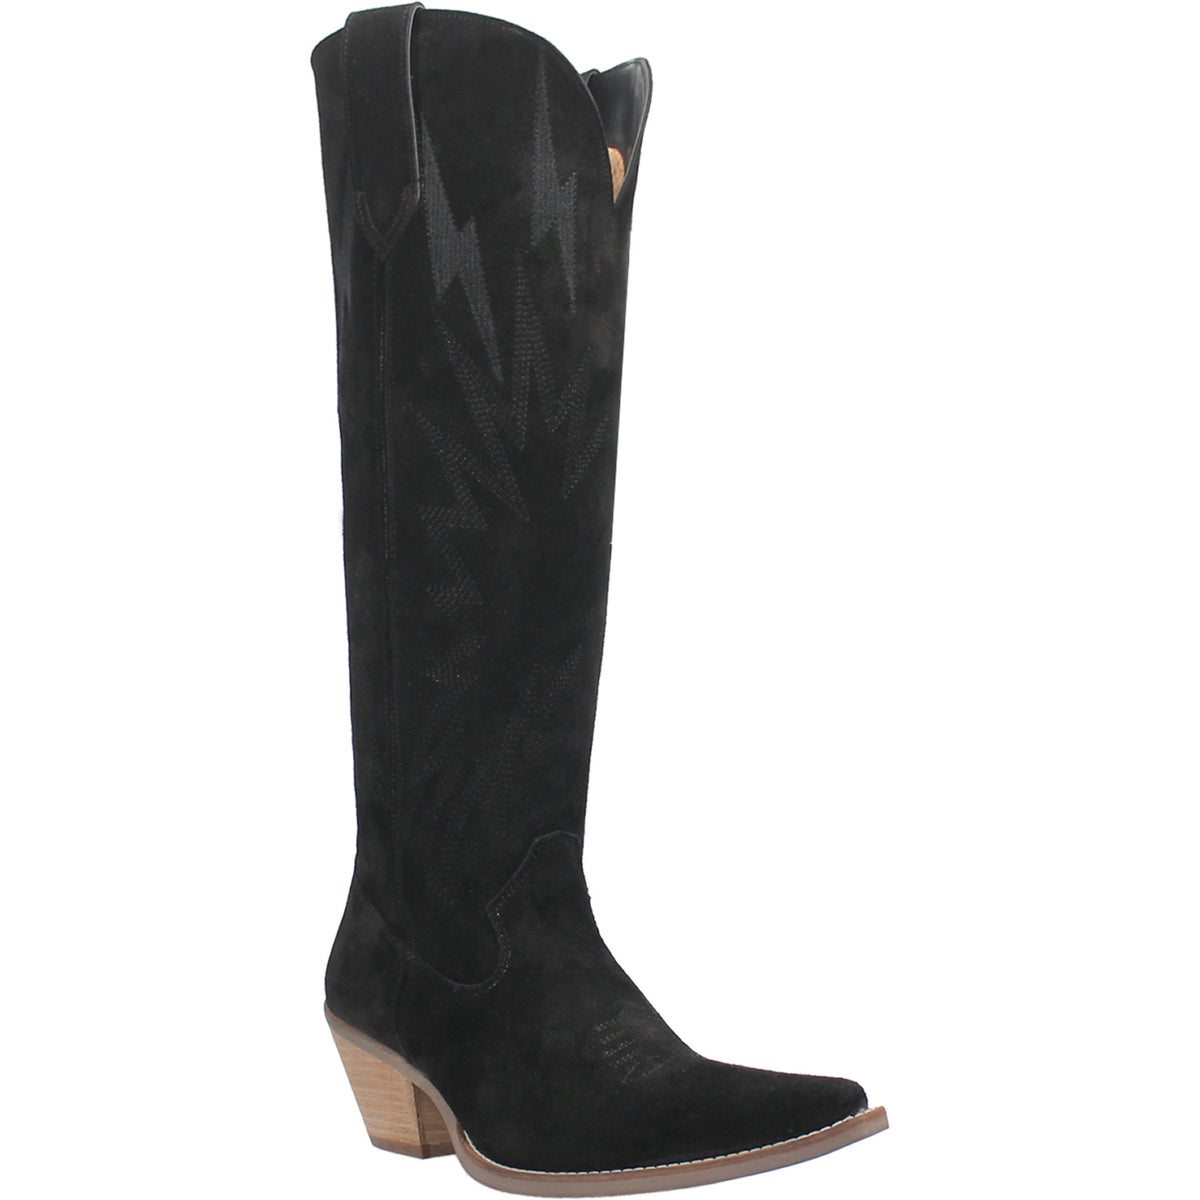 Thunder Road Leather Boot in Black